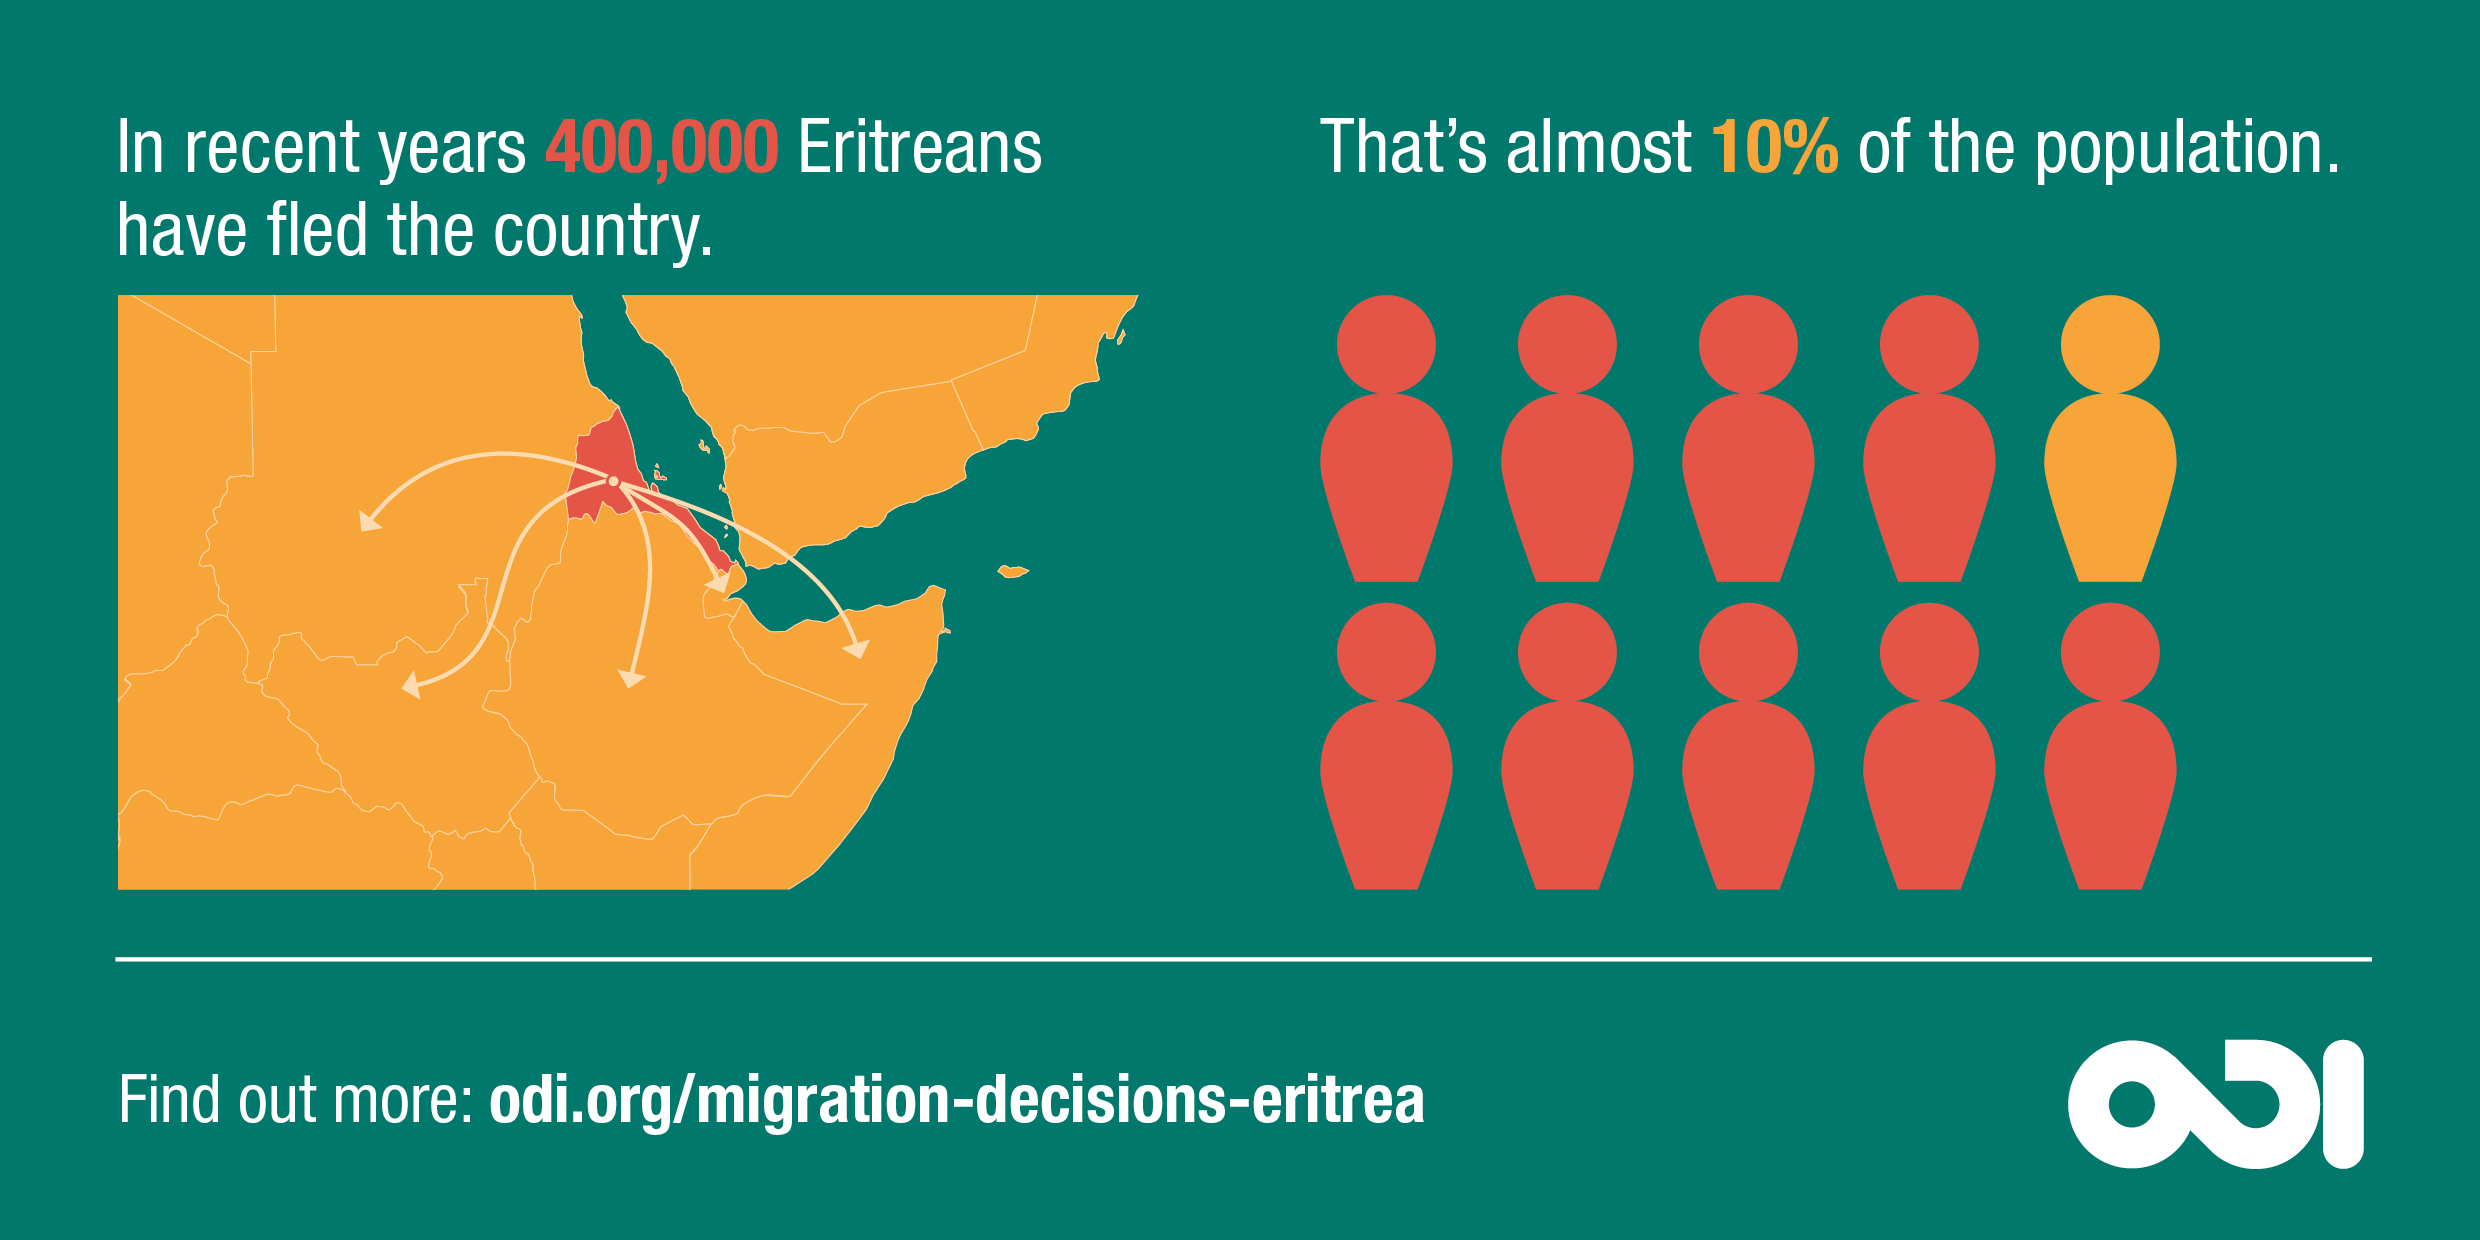 Infographic: in recent years, 10% of the population of Eritrea has fled the country